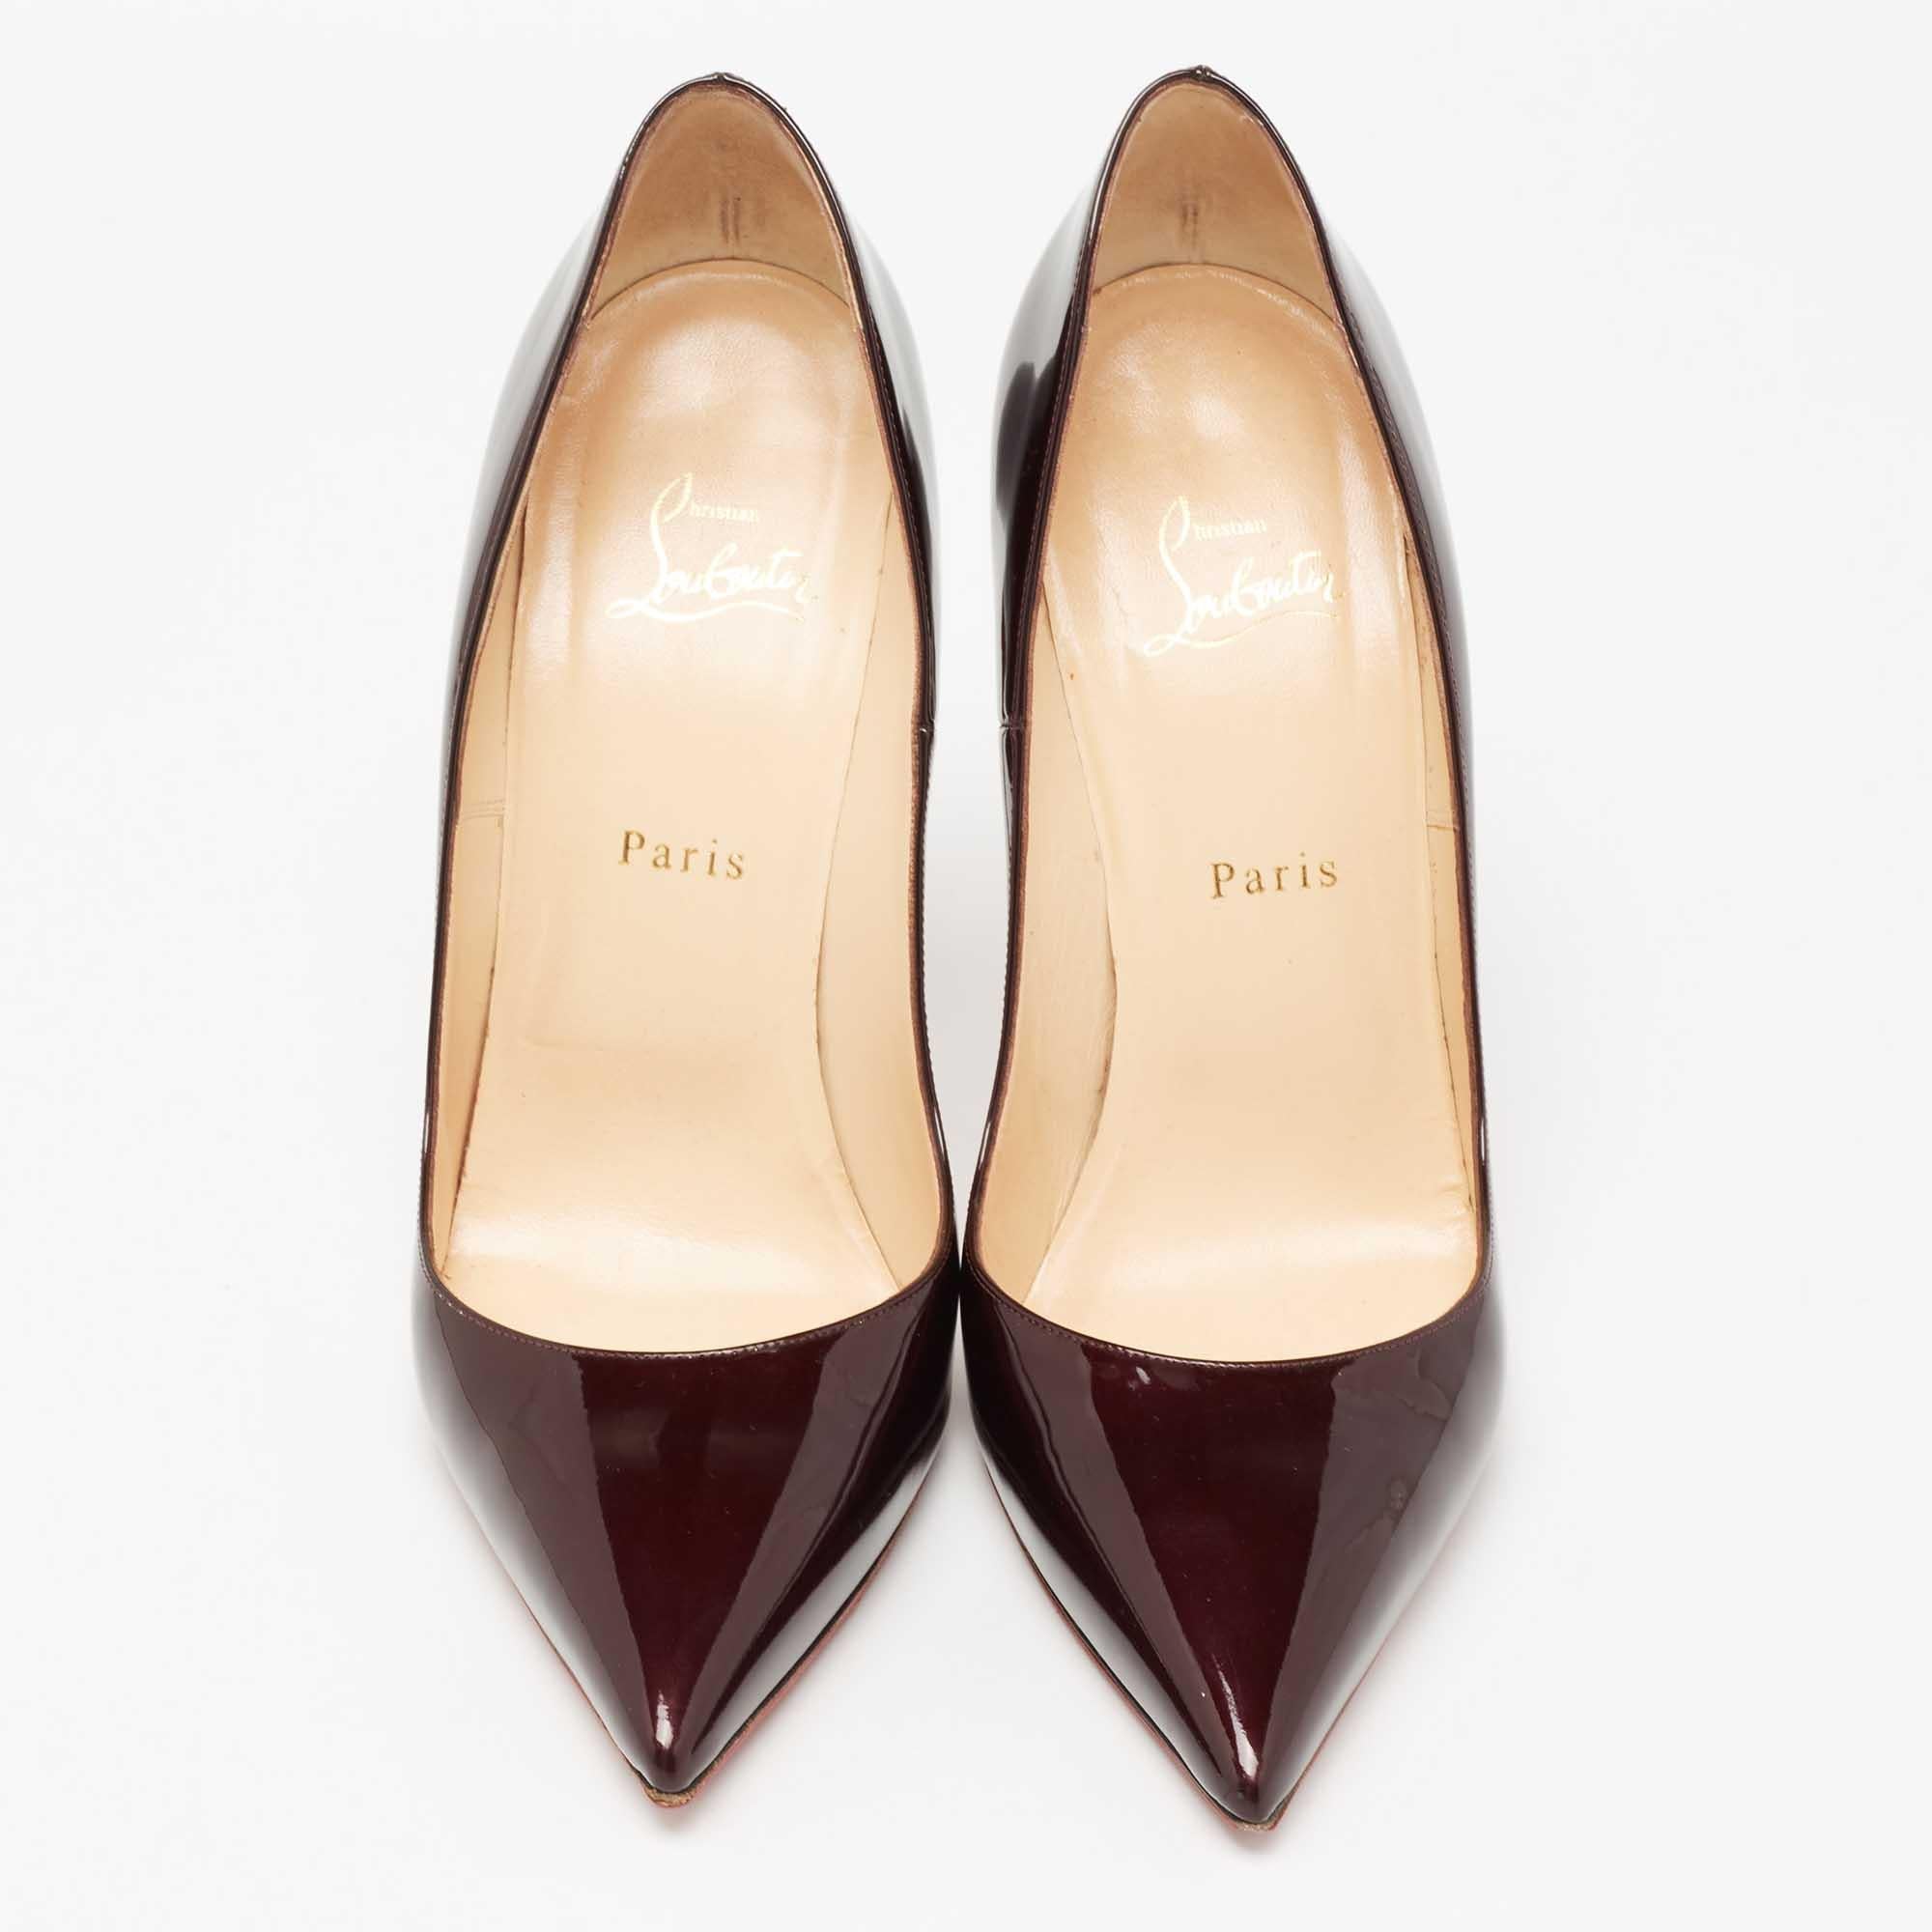 The So Kate collection was named after the famous supermodel Kate Moss known for her fashion choices. Made from patent leather in a dark burgundy hue, these pumps flaunt pointed toes leading to a sleek arch that ends on a high note with 13 cm